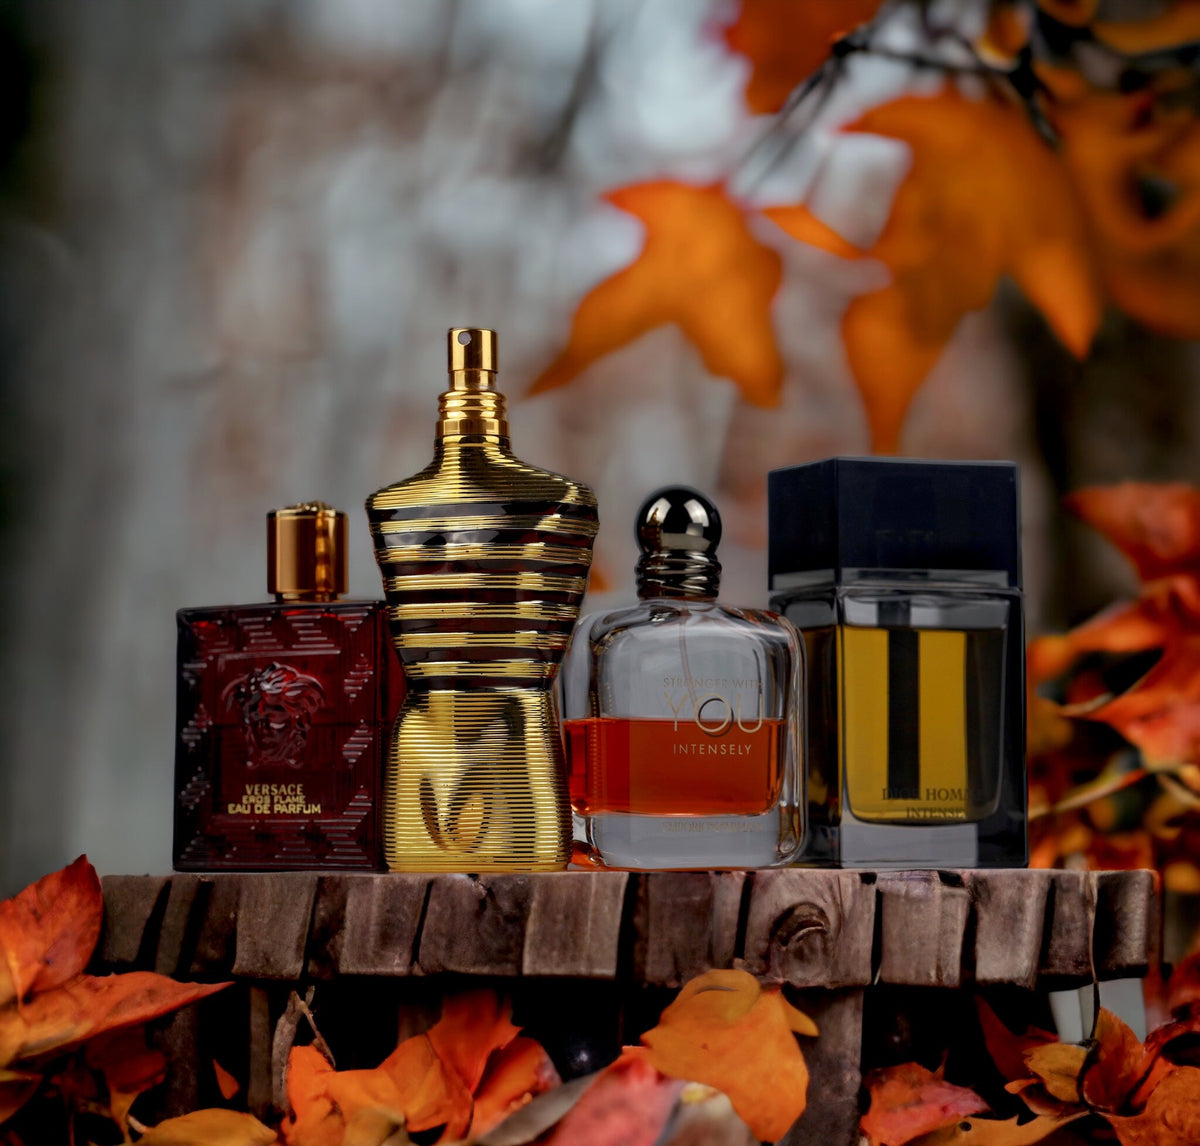 AFTERNOON SWIM- Louis Vuitton Fragrance for Men and Women - Buy Perfume  Samples and Decants - My Fragrance Samples